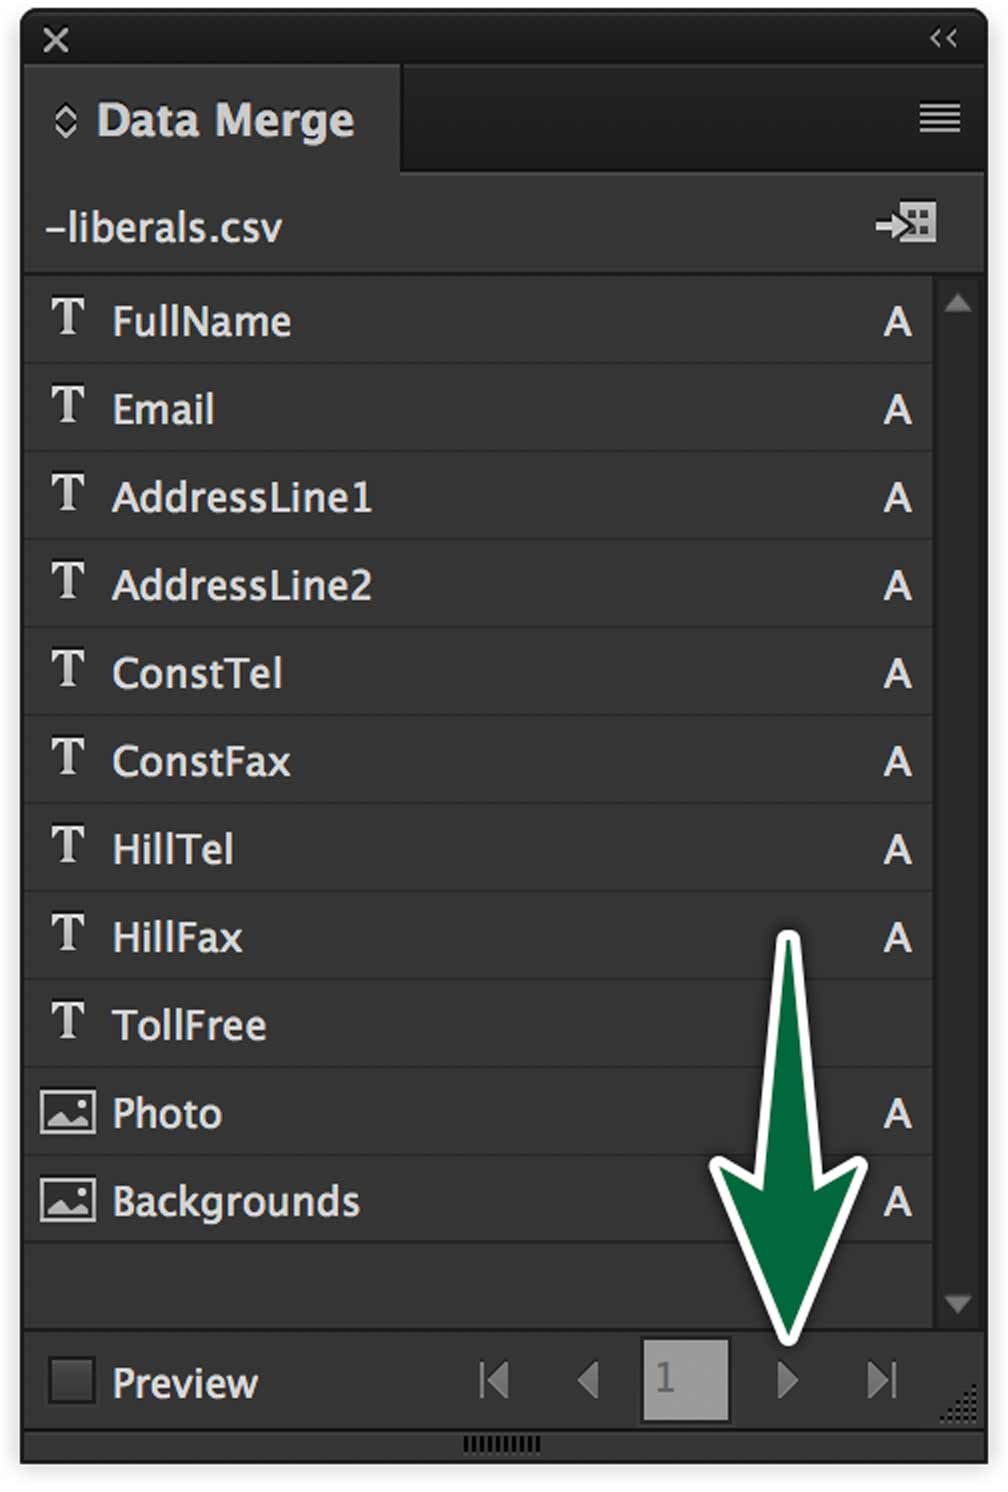 indesign-data-merge-panel-preview